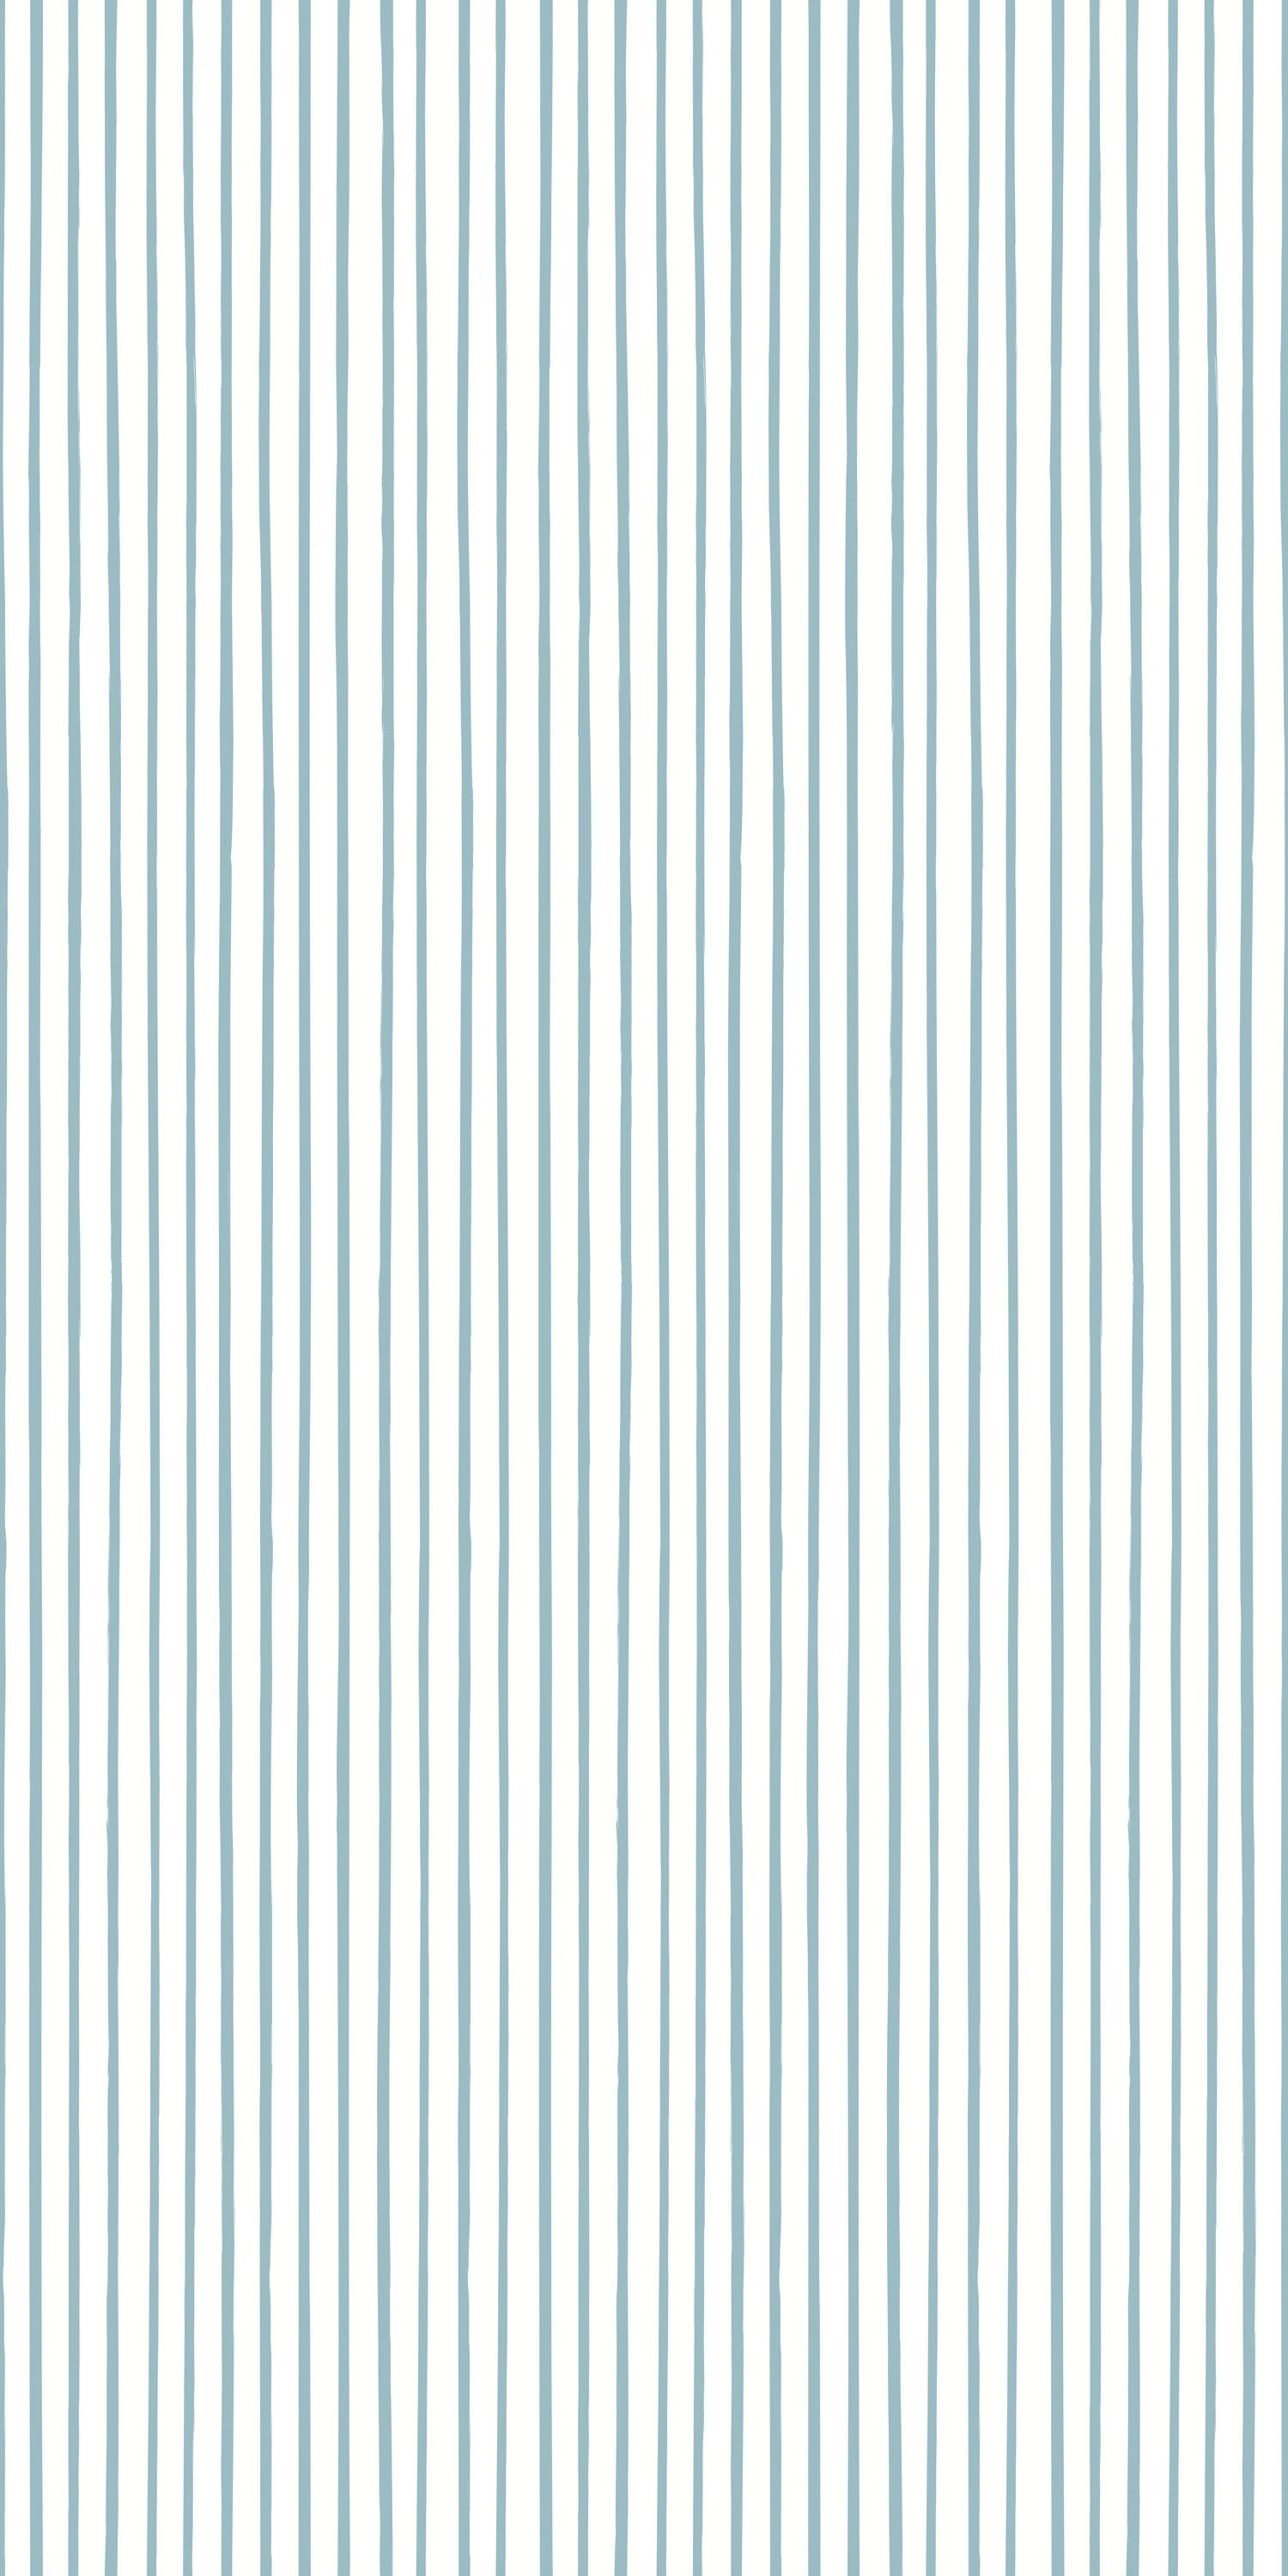 Striped Peel And Stick Removable Wallpaper In Any Color!